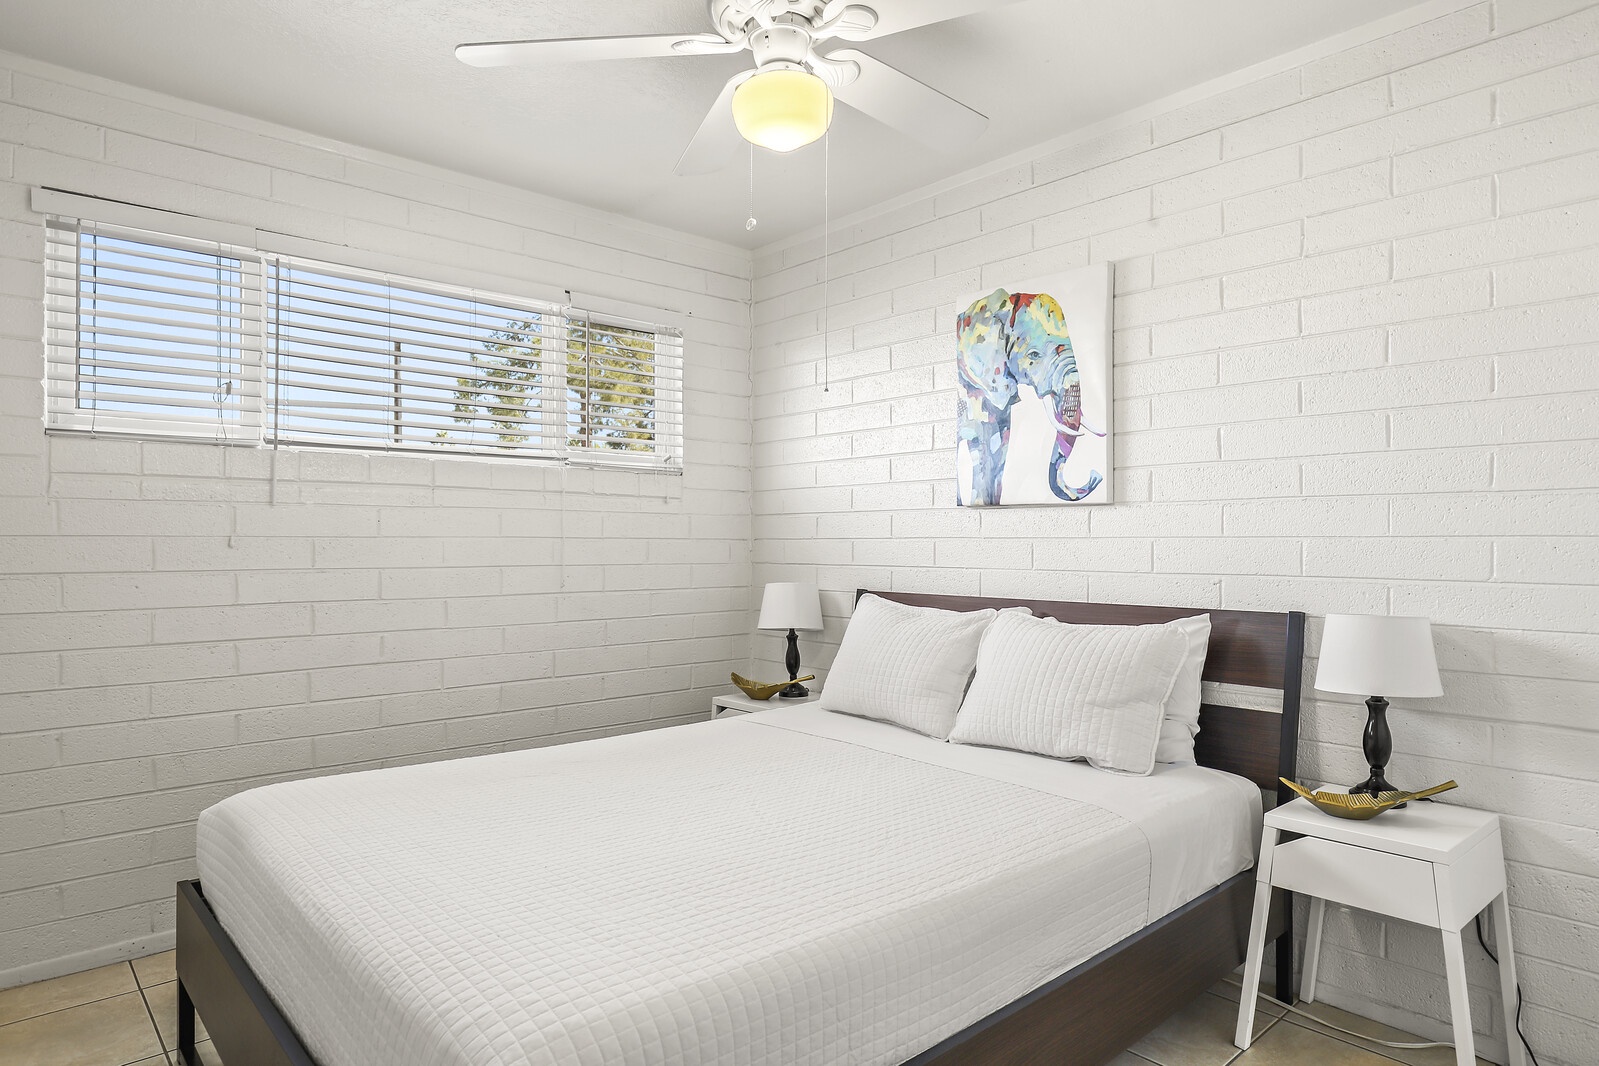 One bedroom with a queen size bed covered in comfortable and clean white linens.